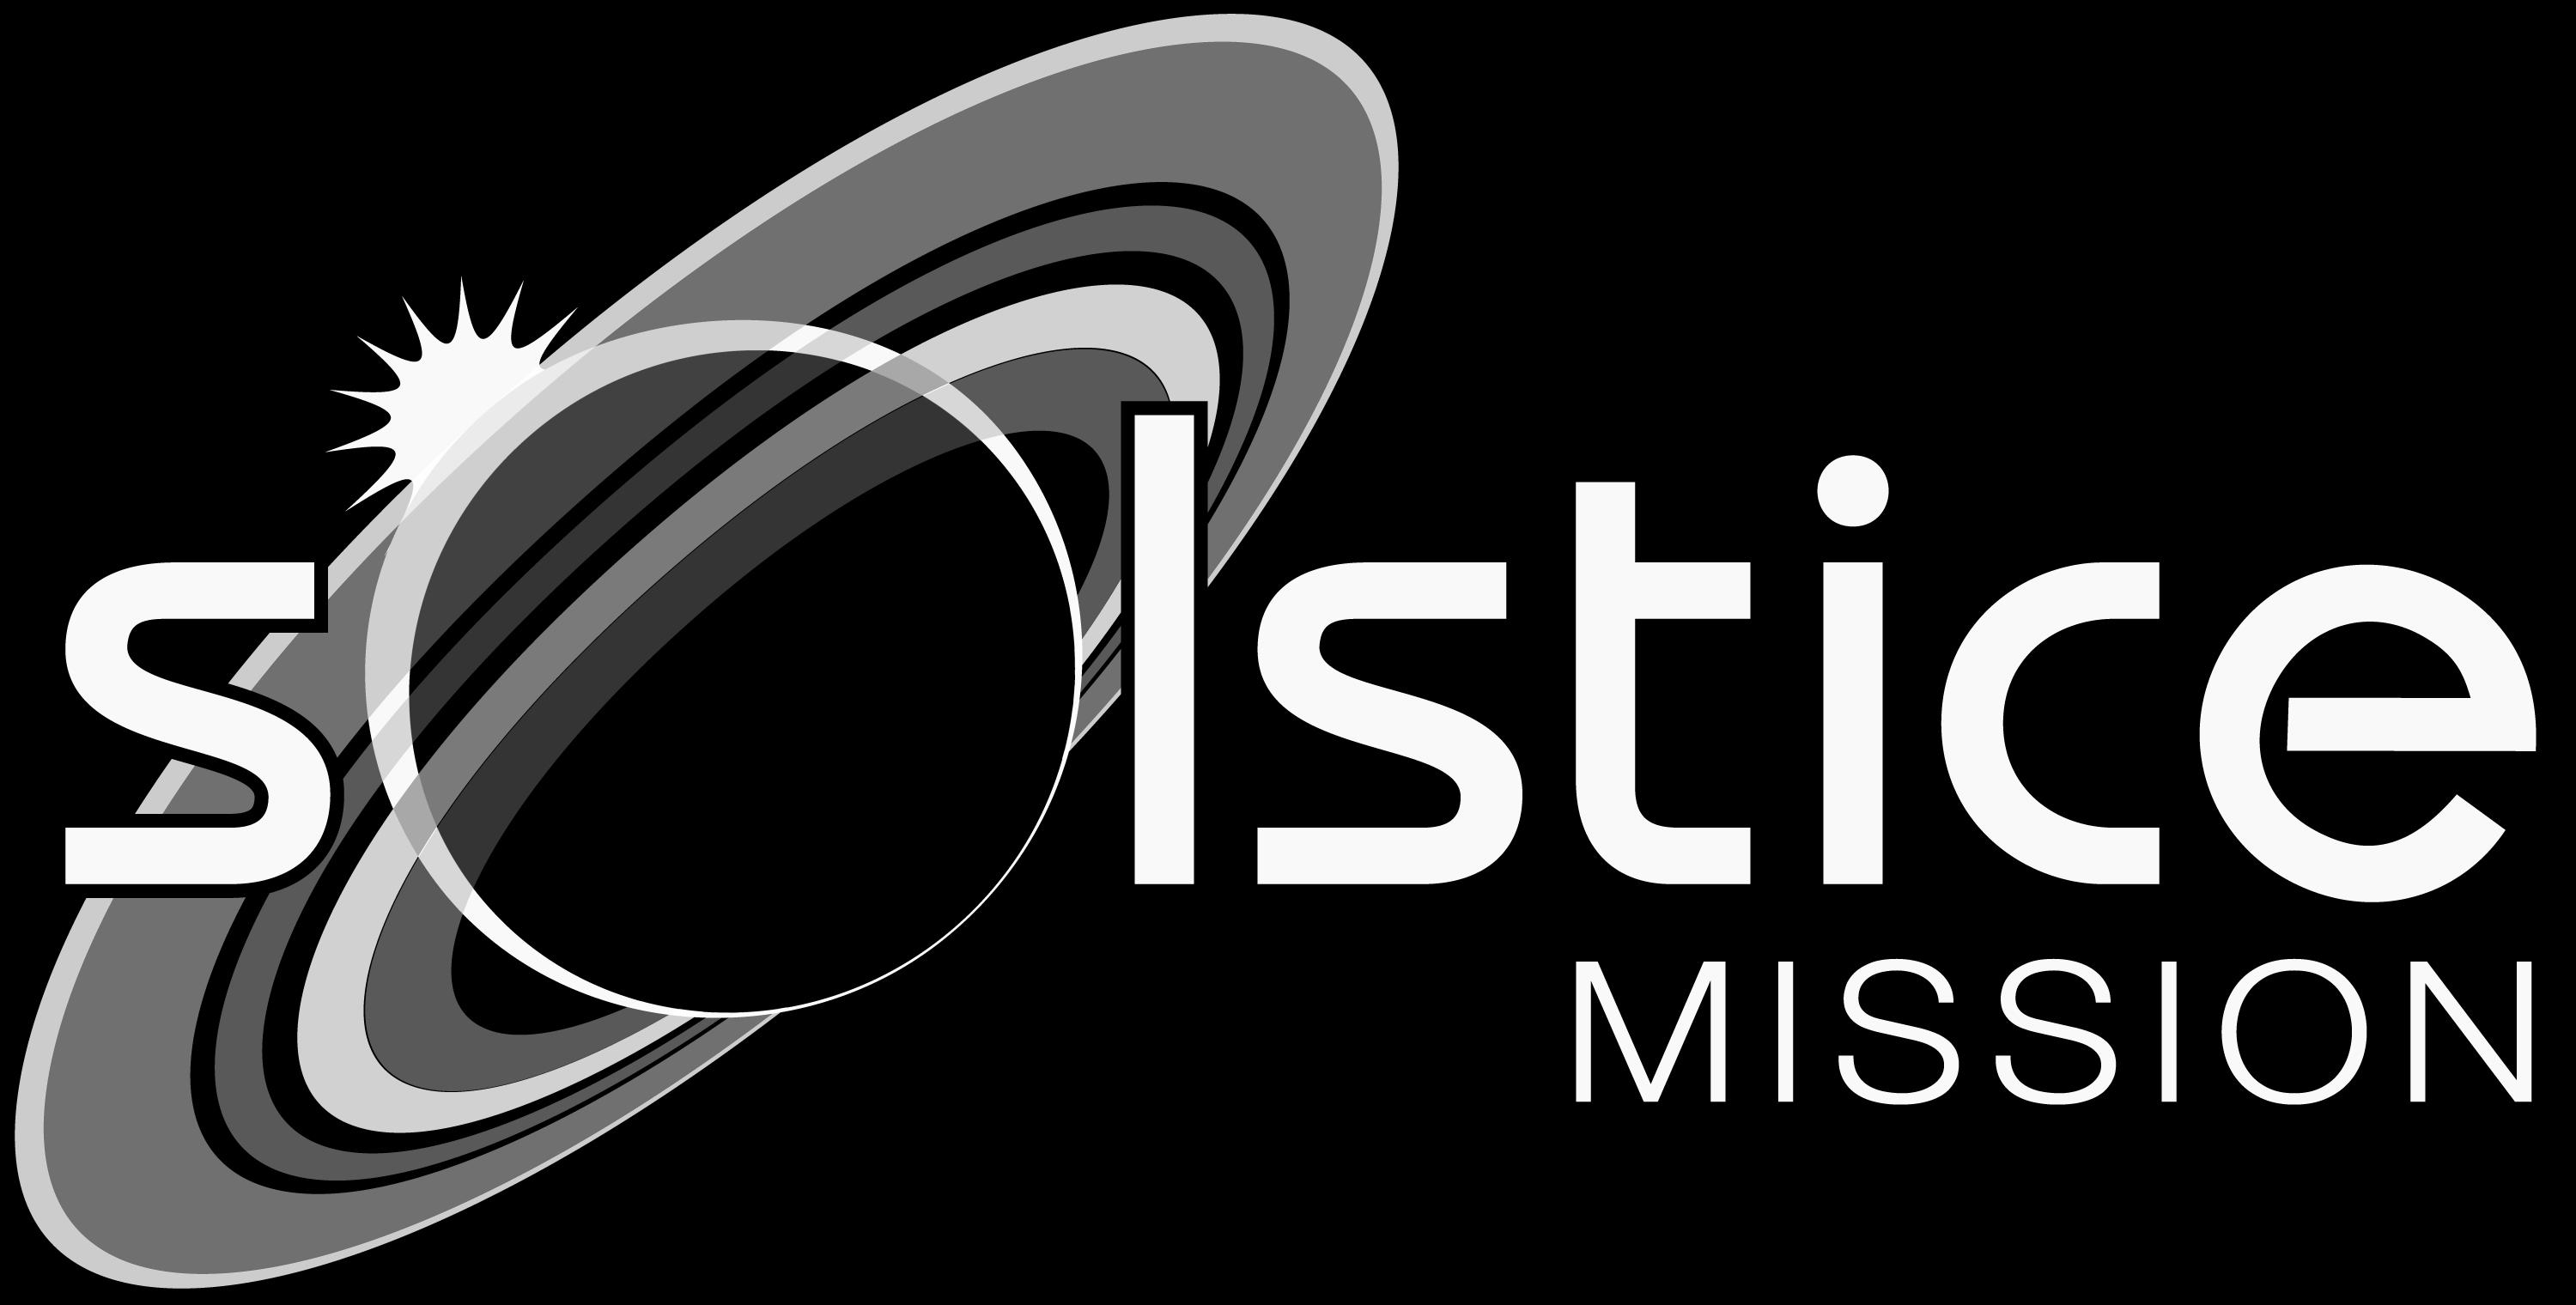 Artwork depicting the second extended mission for Cassini, called the "Solstice Mission."